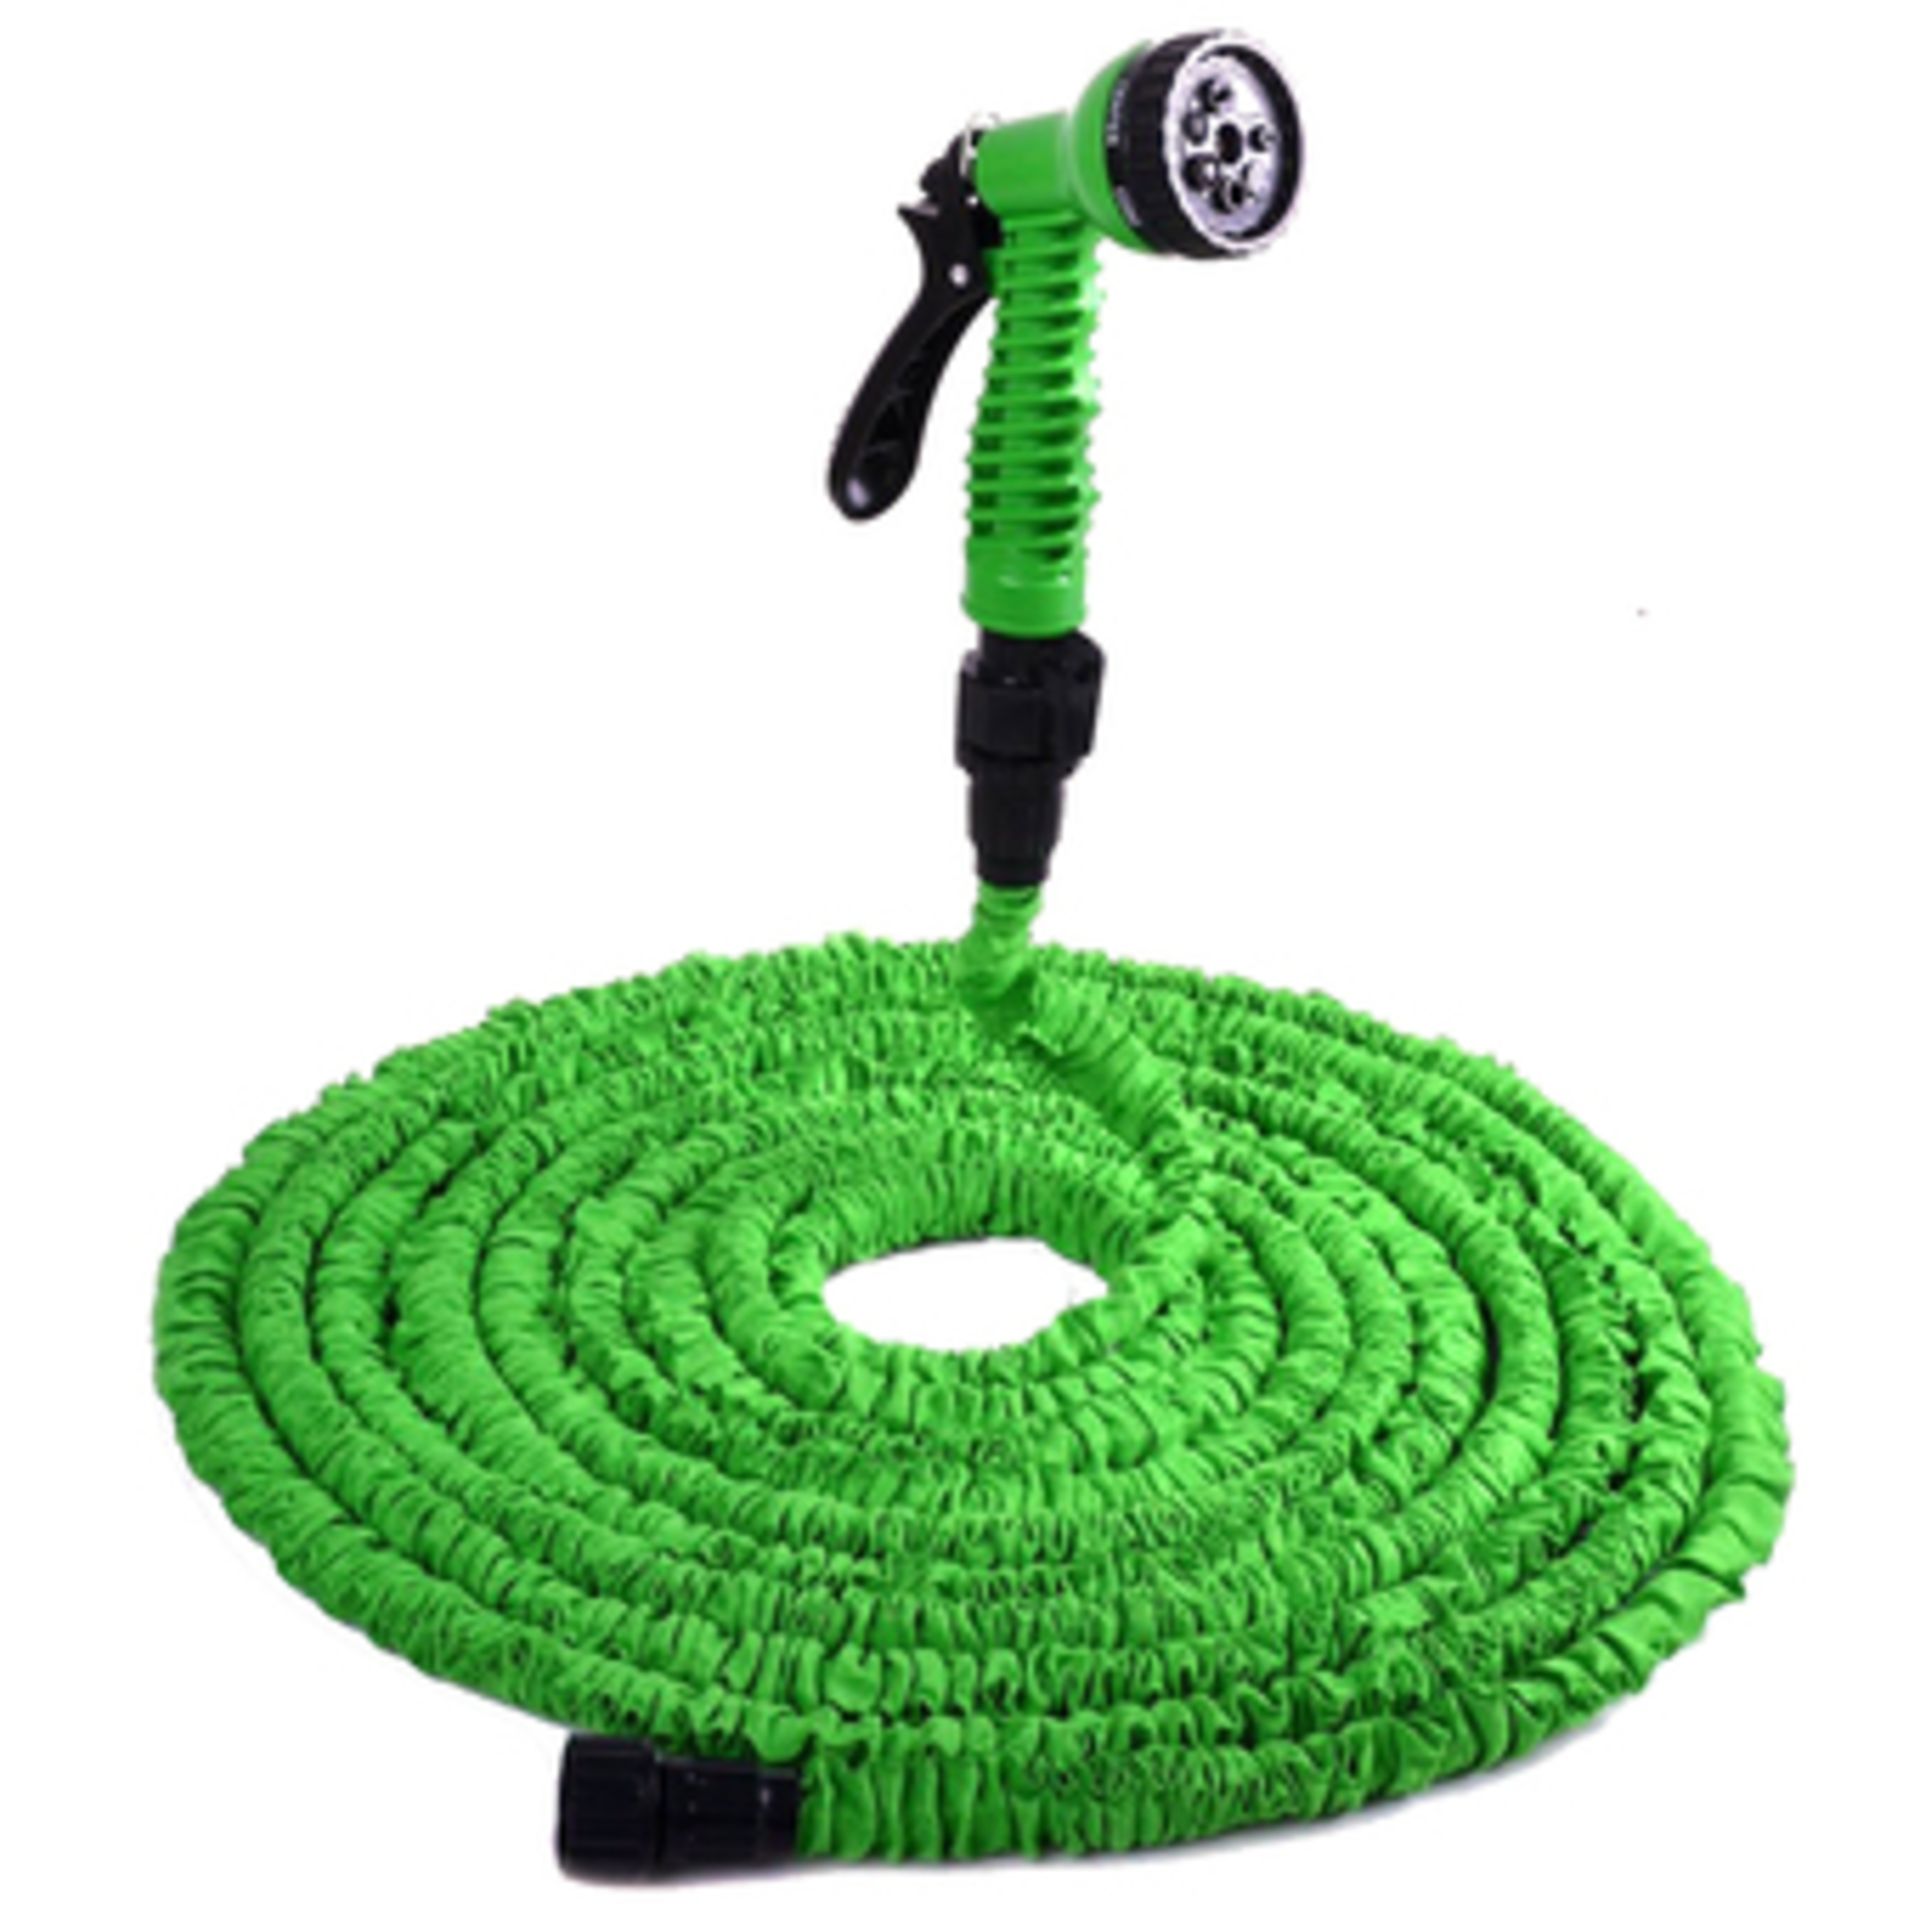 V Brand New 25 Foot Expanding Hose RRP39.99 Colour May Vary